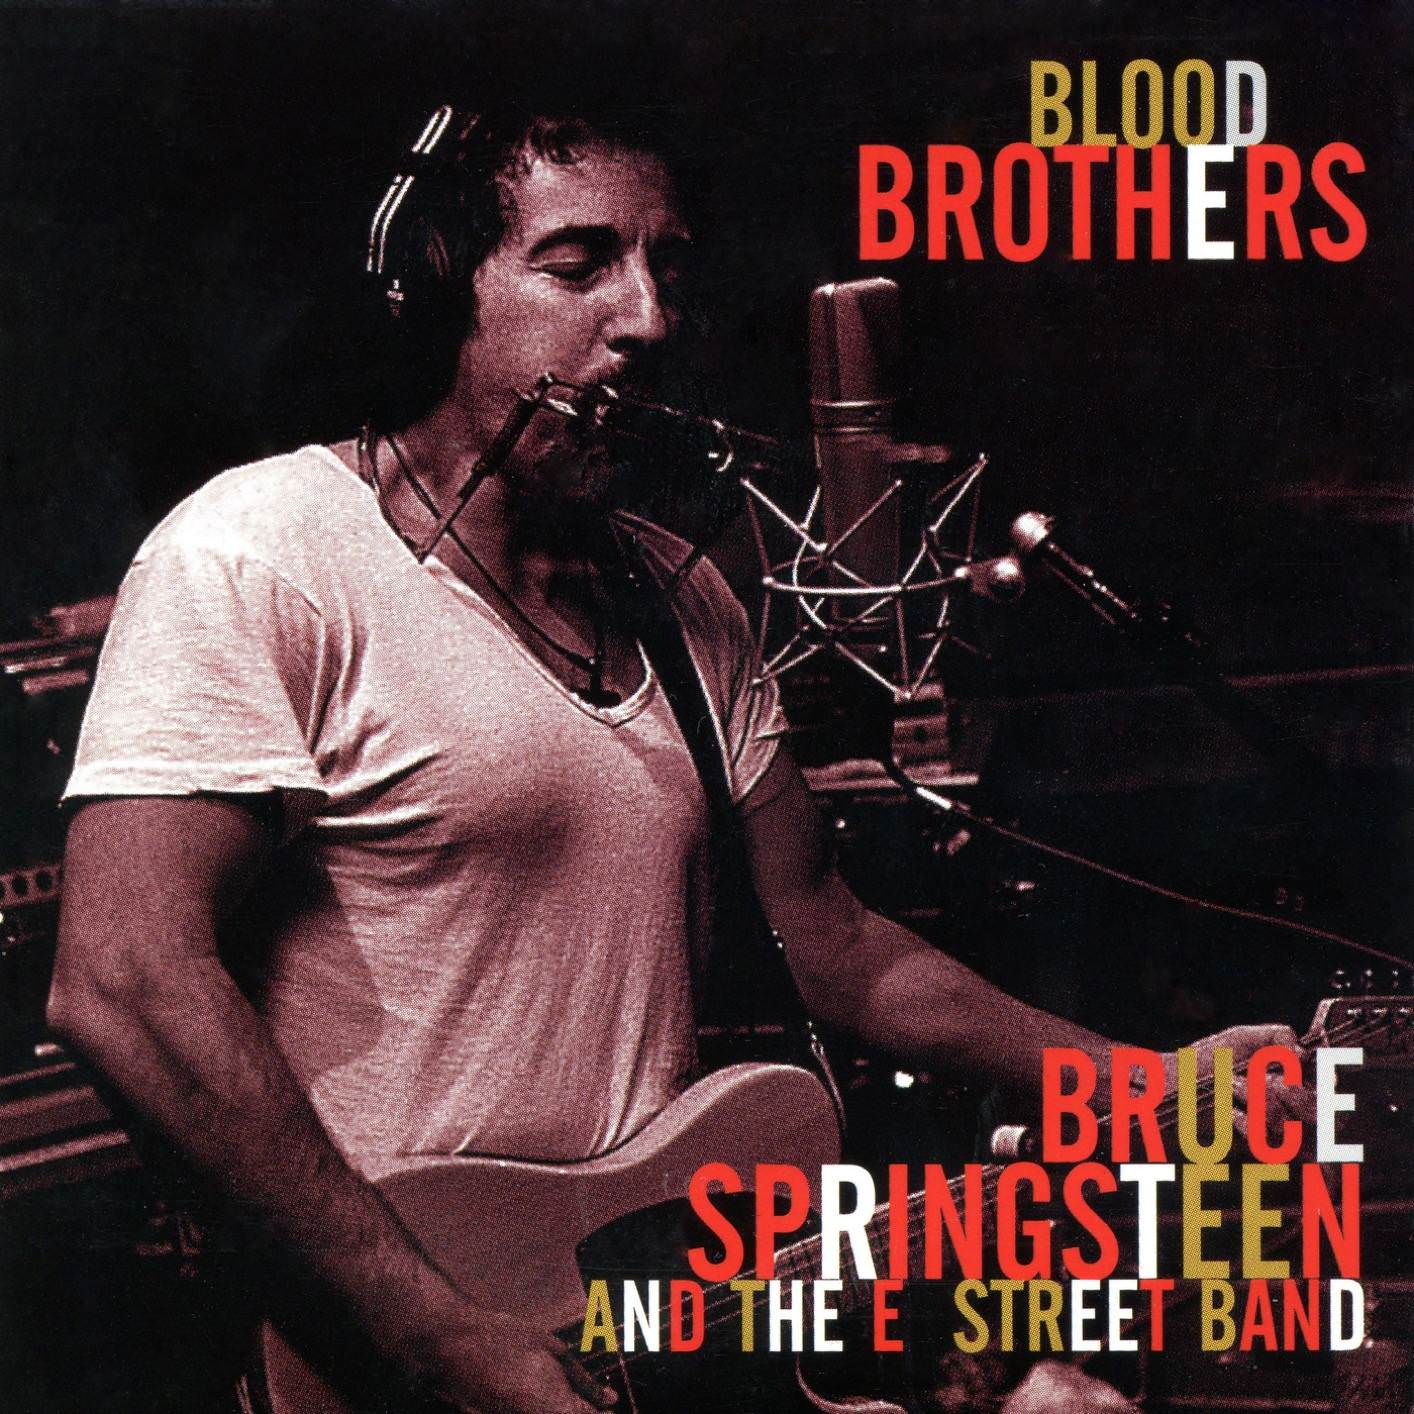 Bruce Springsteen – Blood Brothers EP (1996/2018) [FLAC 24bit/96kHz]